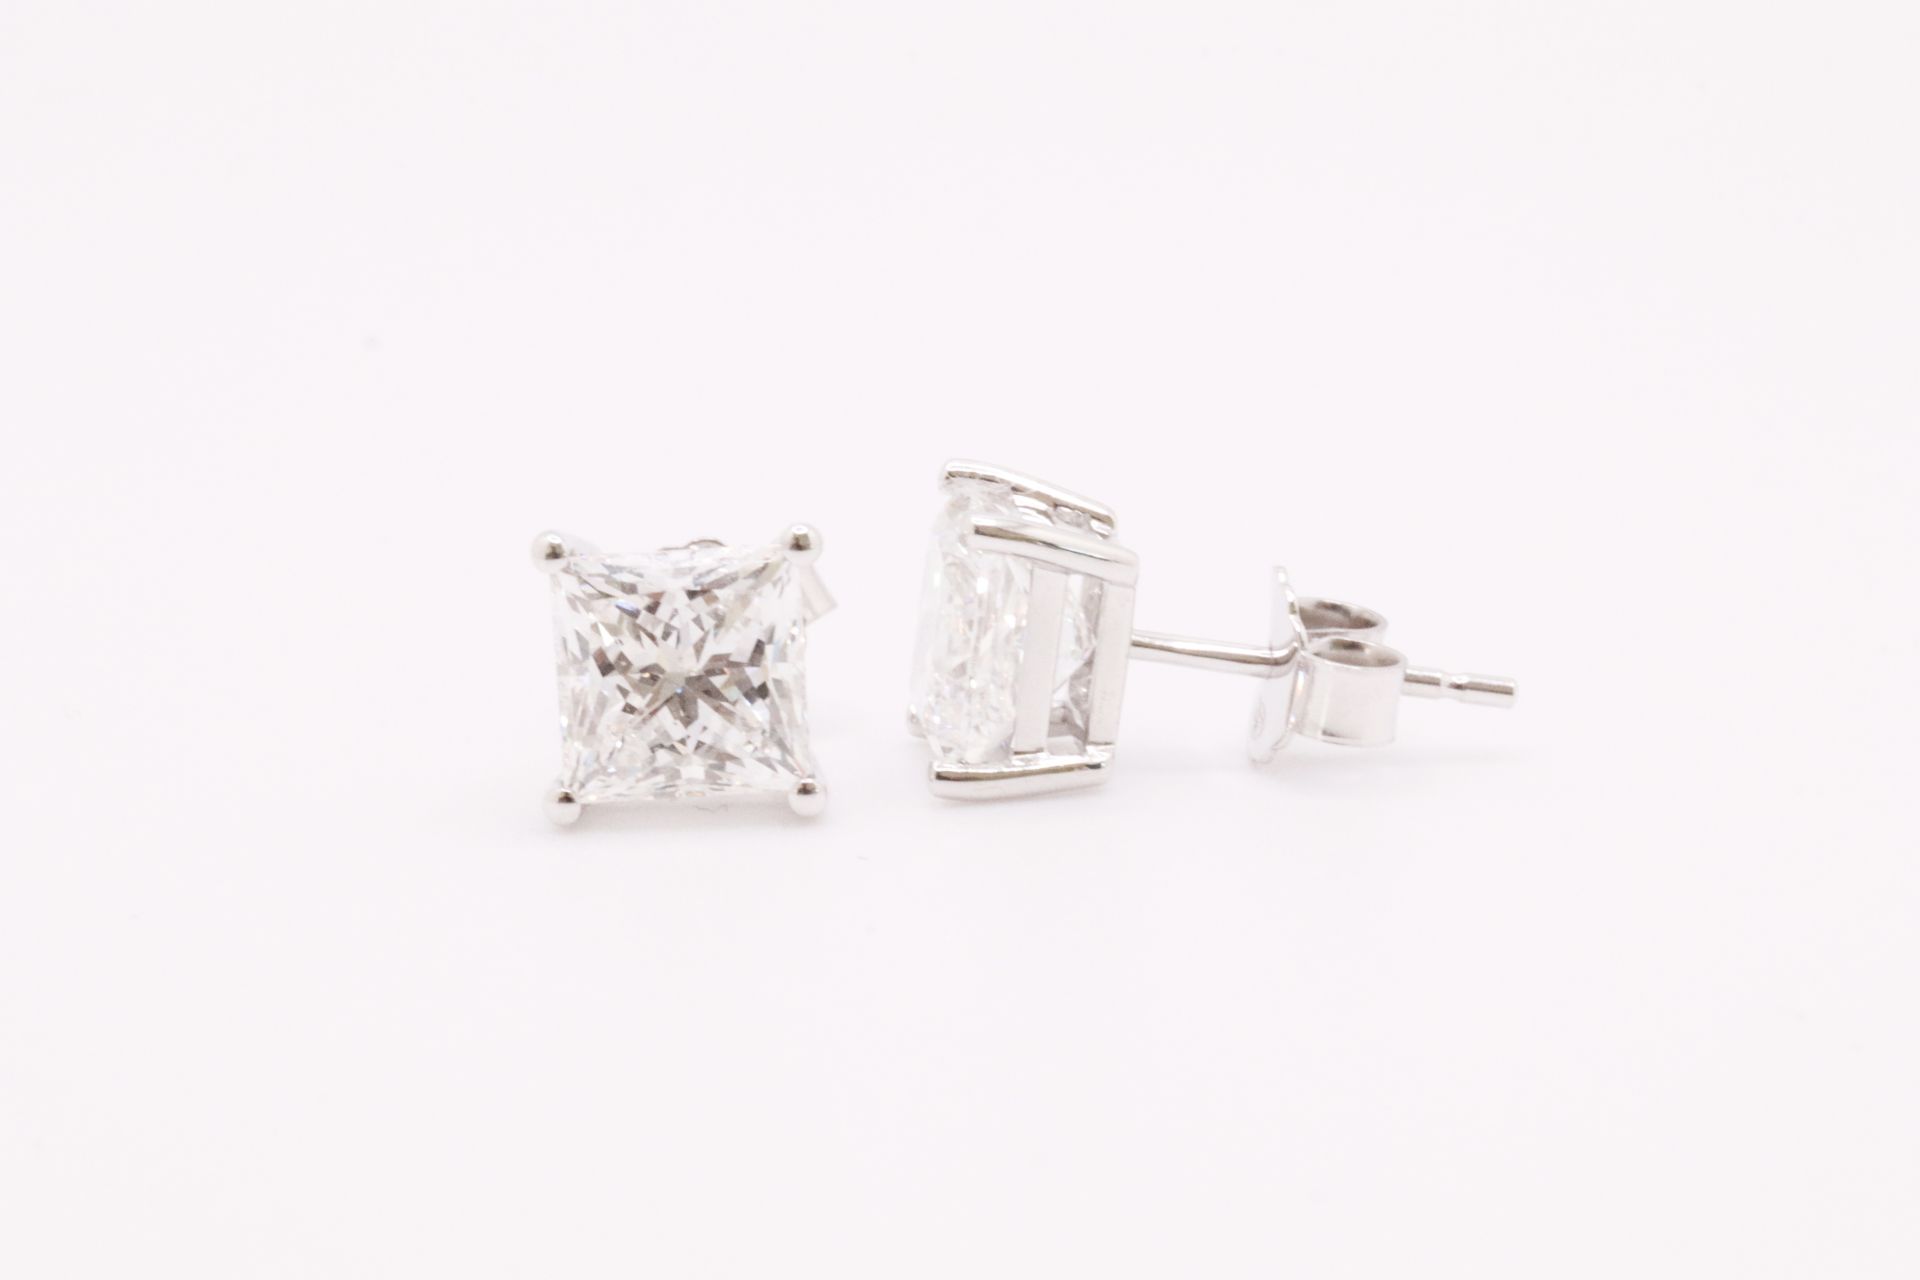 Princess Cut 5.00 Carat Diamond Earrings Set in 18kt White Gold - F Colour VS Clarity - Image 2 of 5